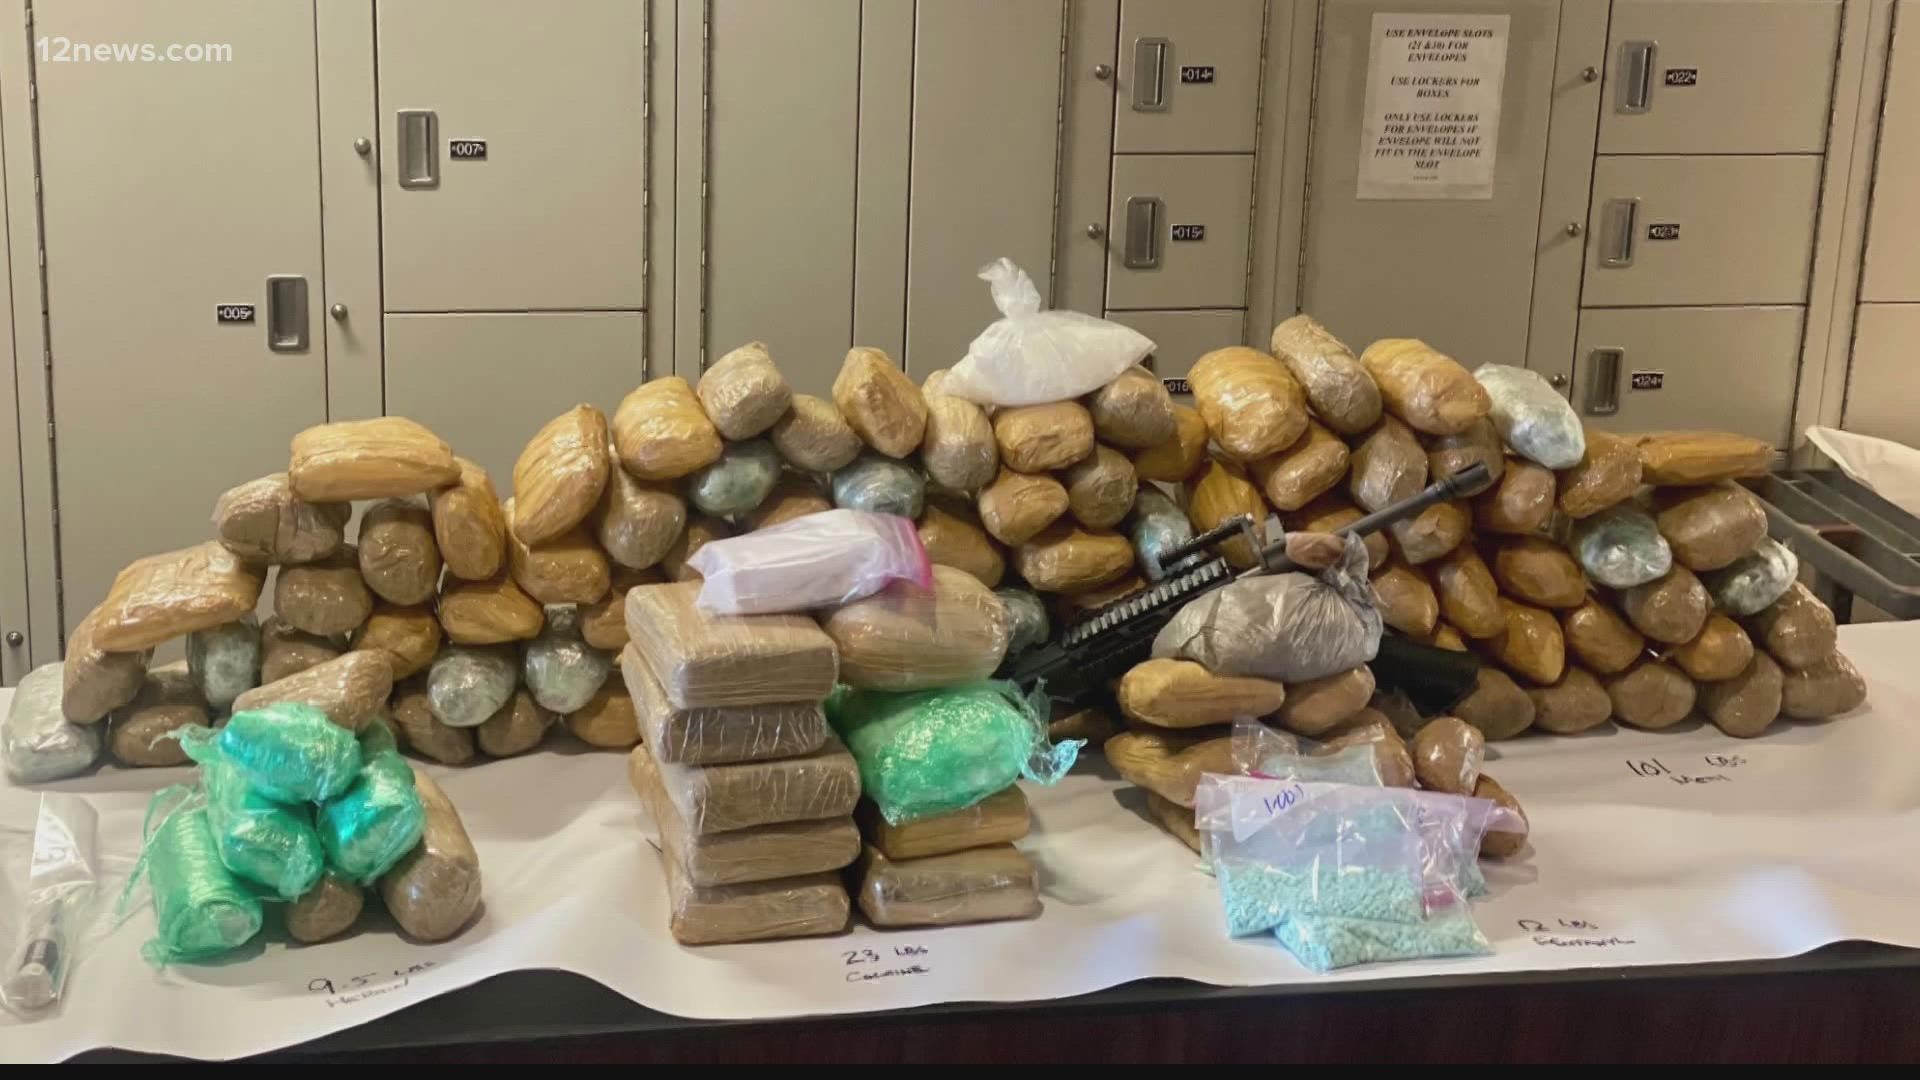 Authorities have arrested two Phoenix residents who were allegedly found in possession of more than 100 pounds of meth, cocaine, and fentanyl.